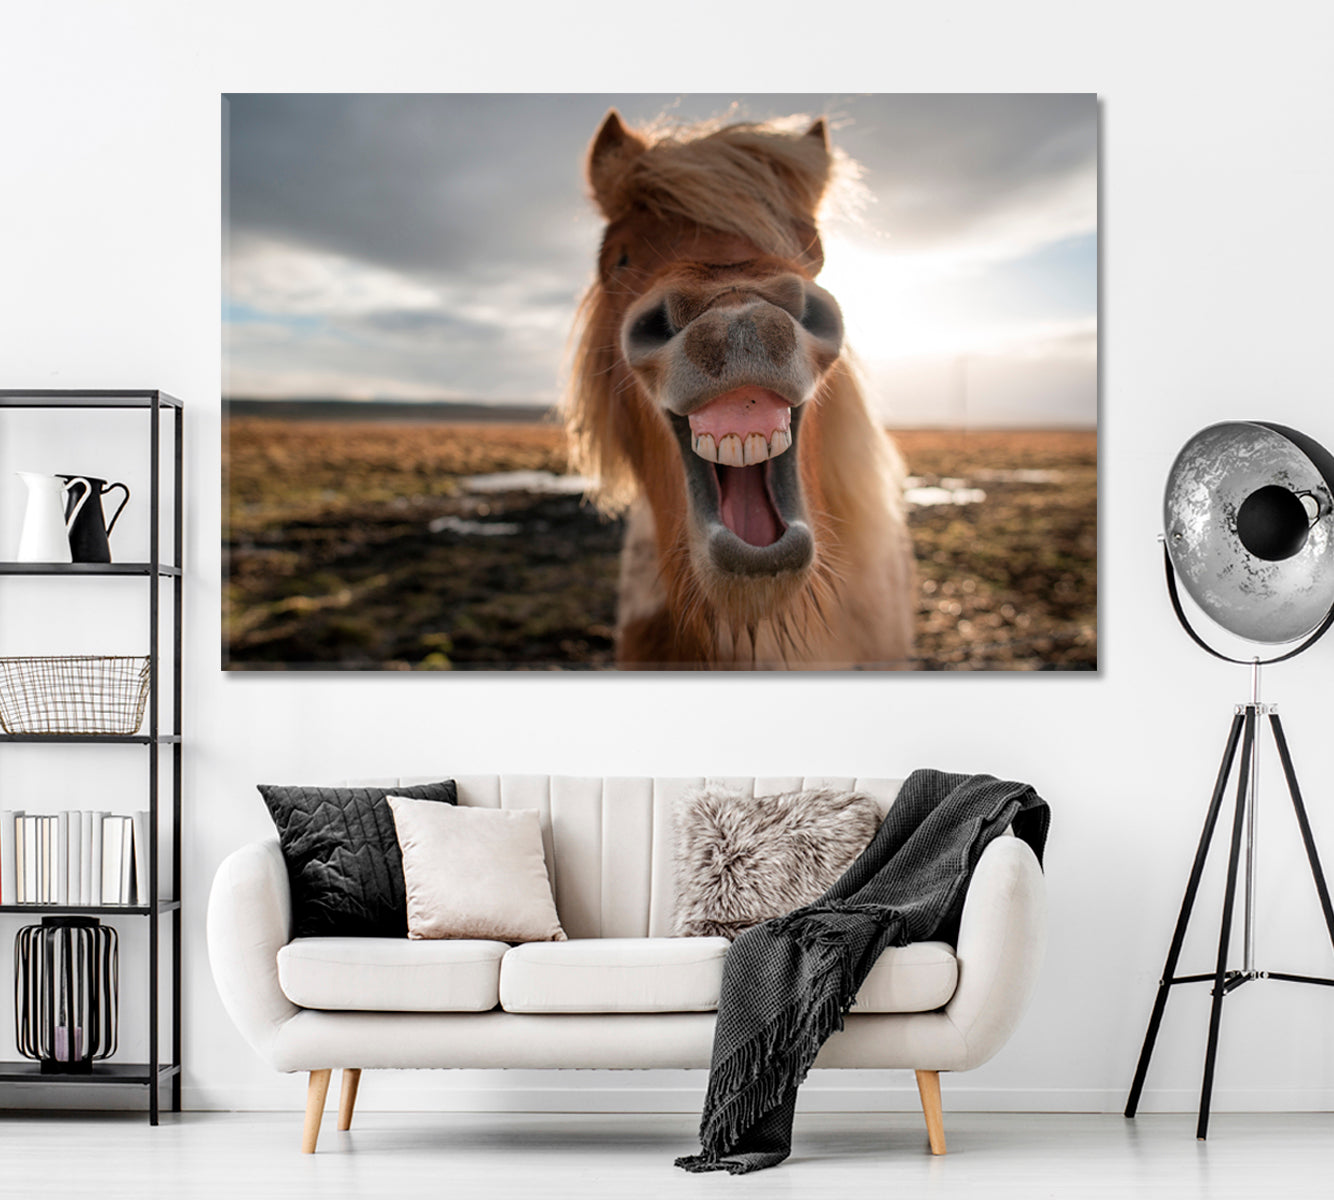 Smiling Icelandic Horse Canvas Print ArtLexy 1 Panel 24"x16" inches 